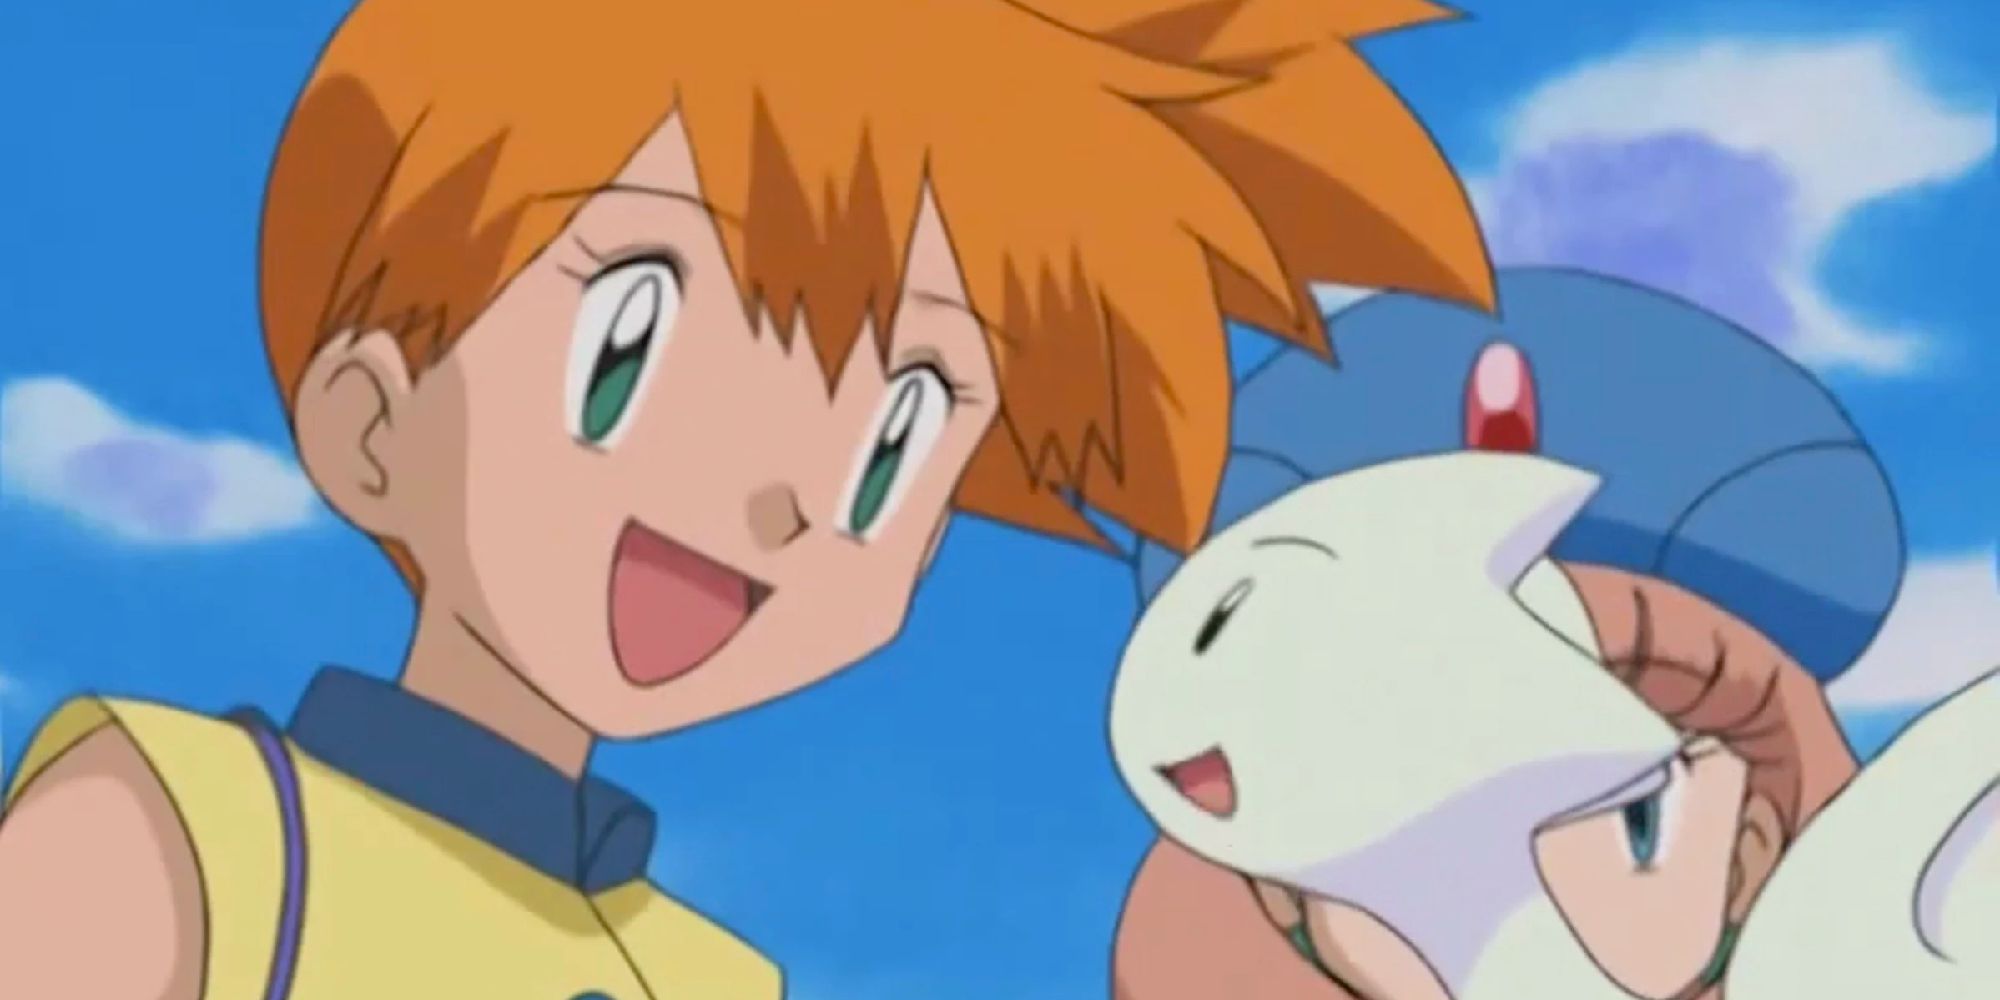 Misty smiling at her Togetic